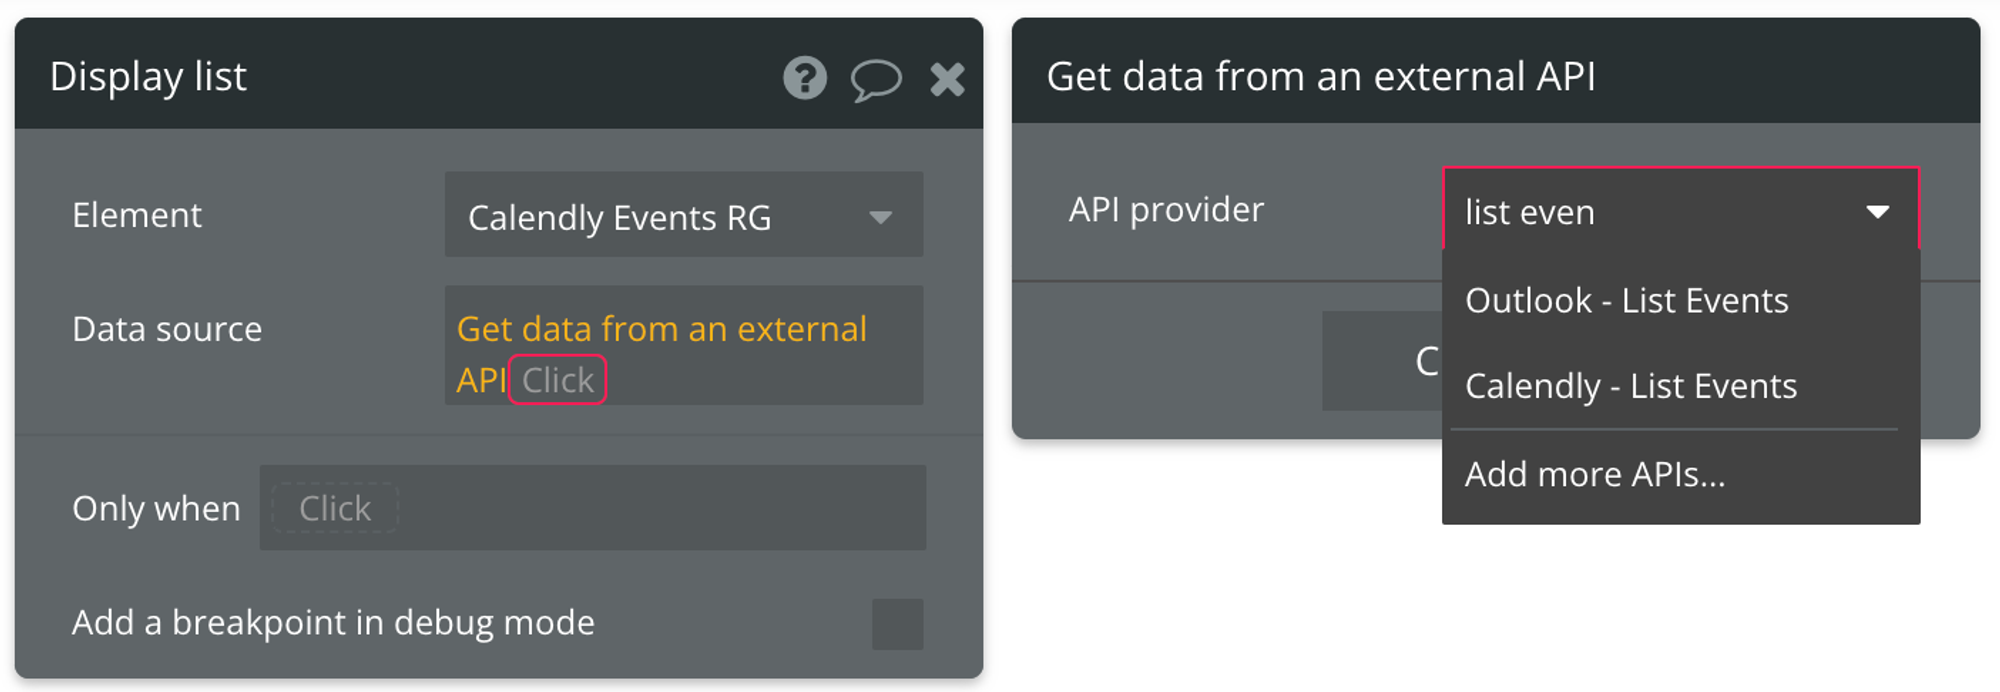 Select "Get data from external API" from the list of data sources, then find Calendly - List Events from the list of API providers